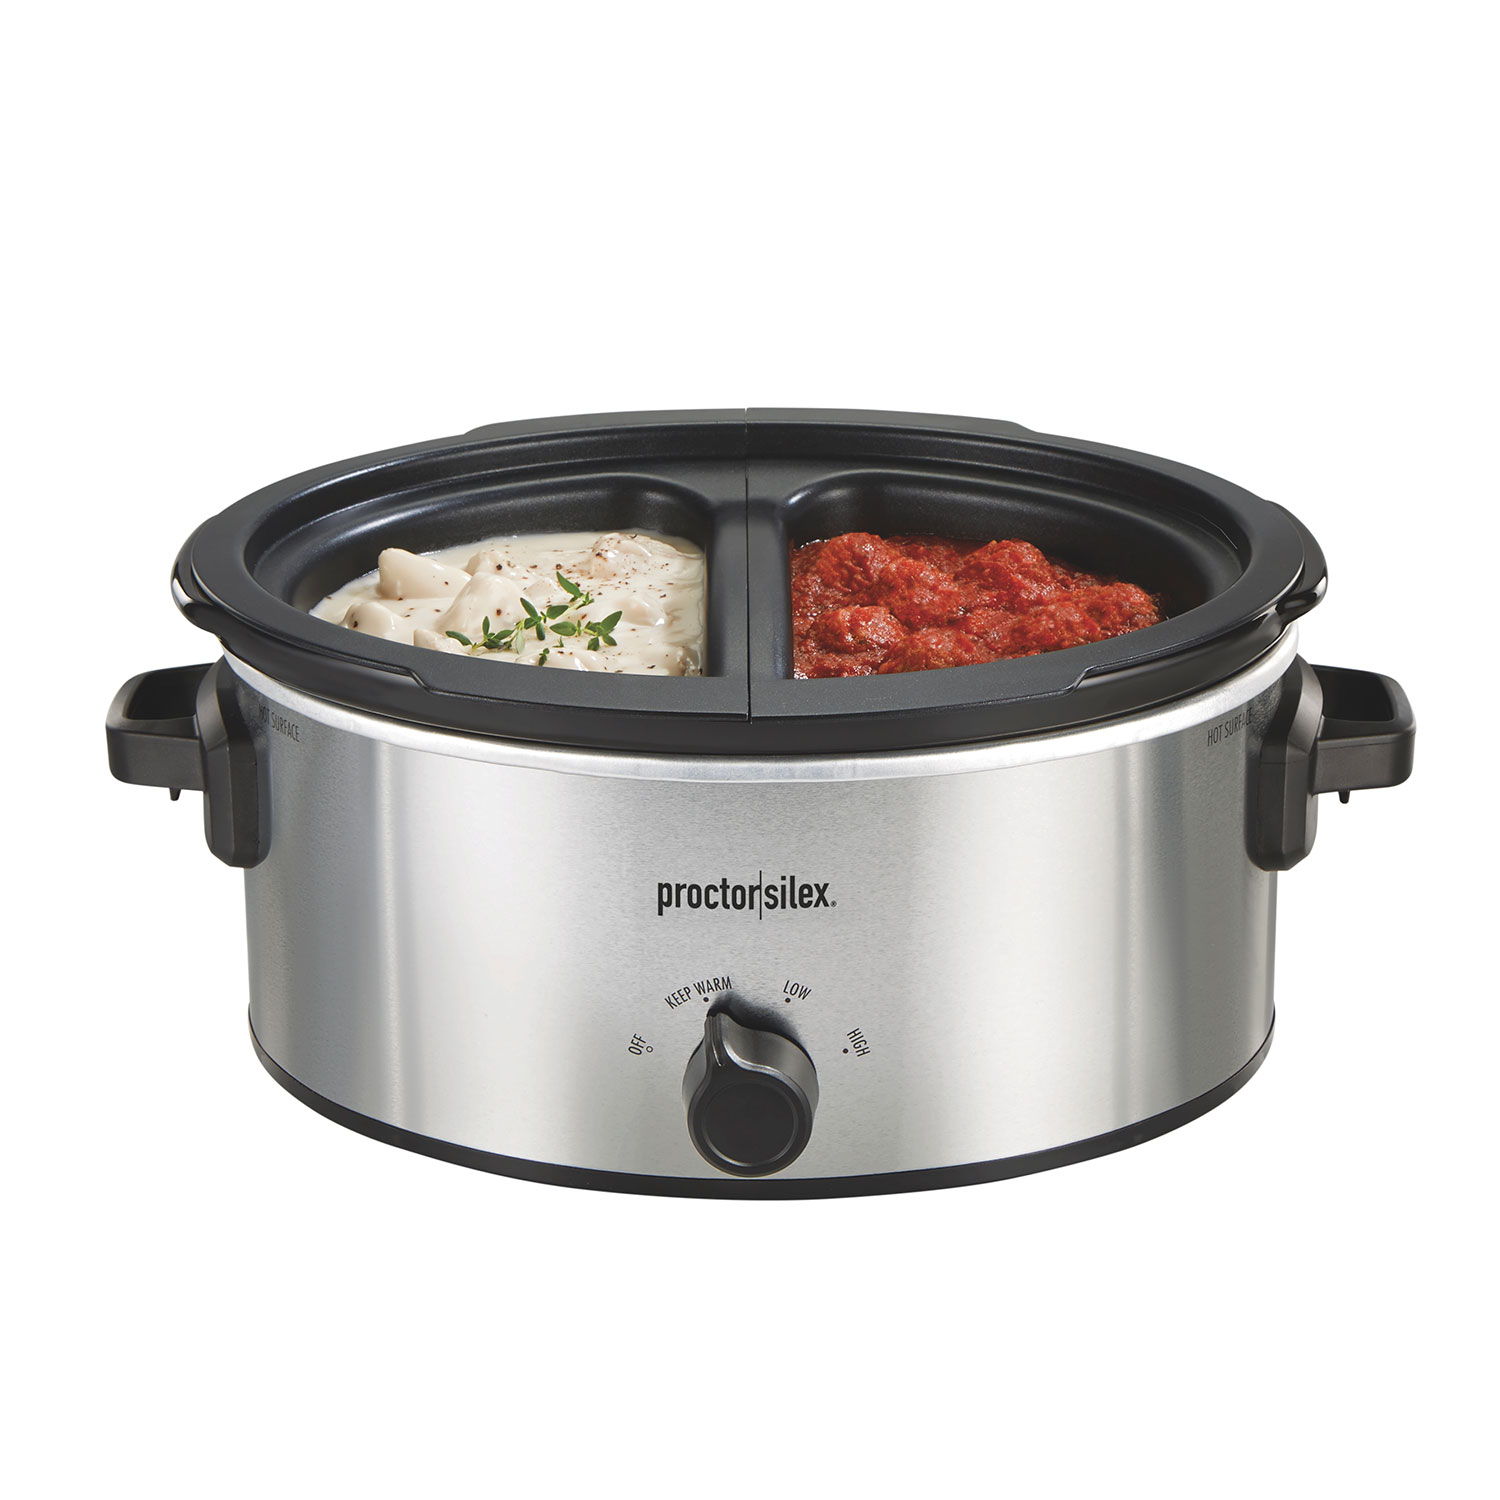 6 Quart Double-Dish Slow Cooker - 33563 Small Size